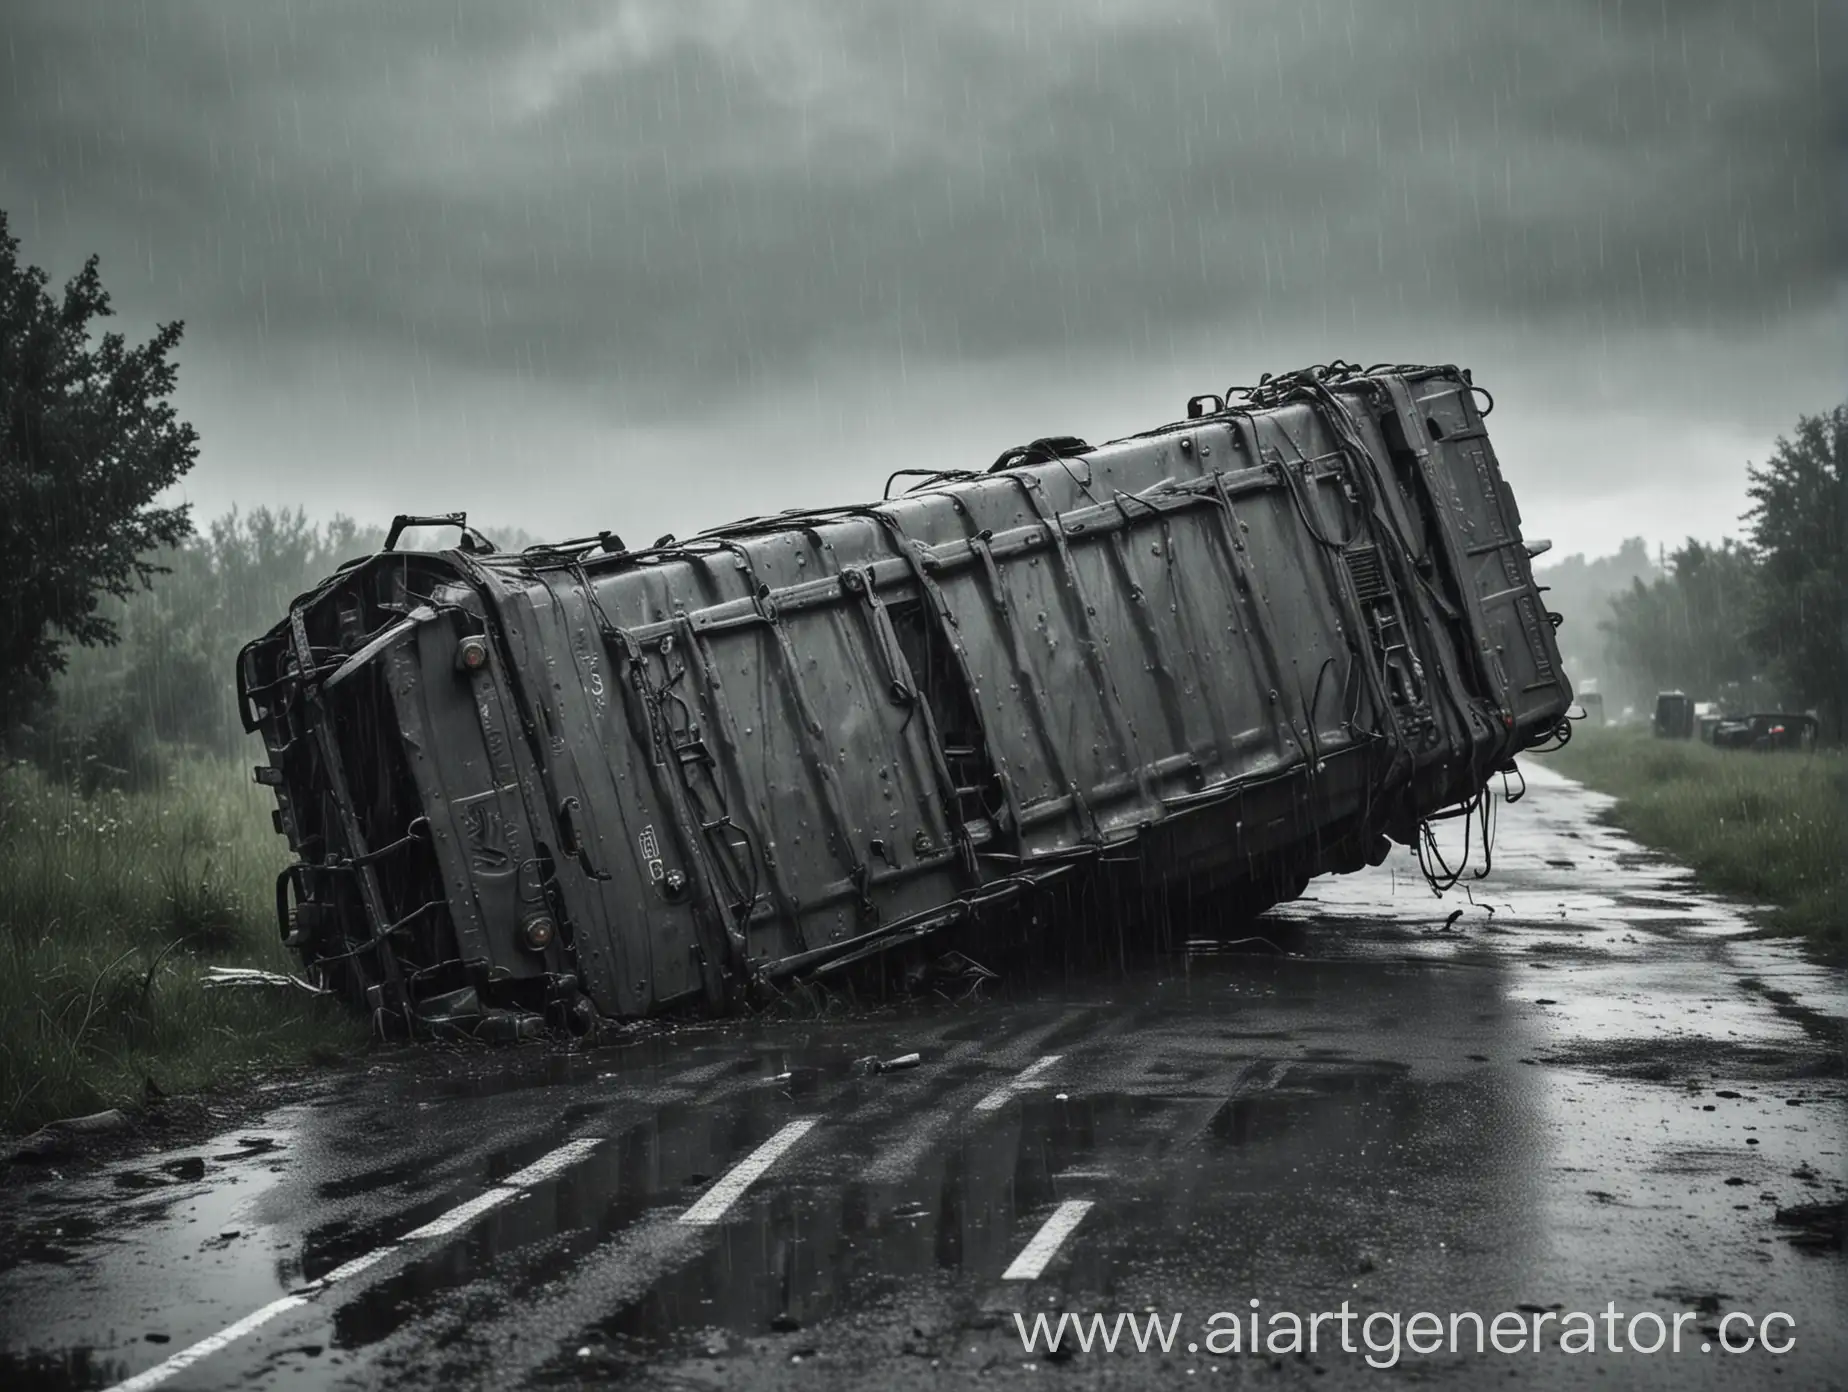 An overturned truck, a lot of rain and fear, gray tones, an  